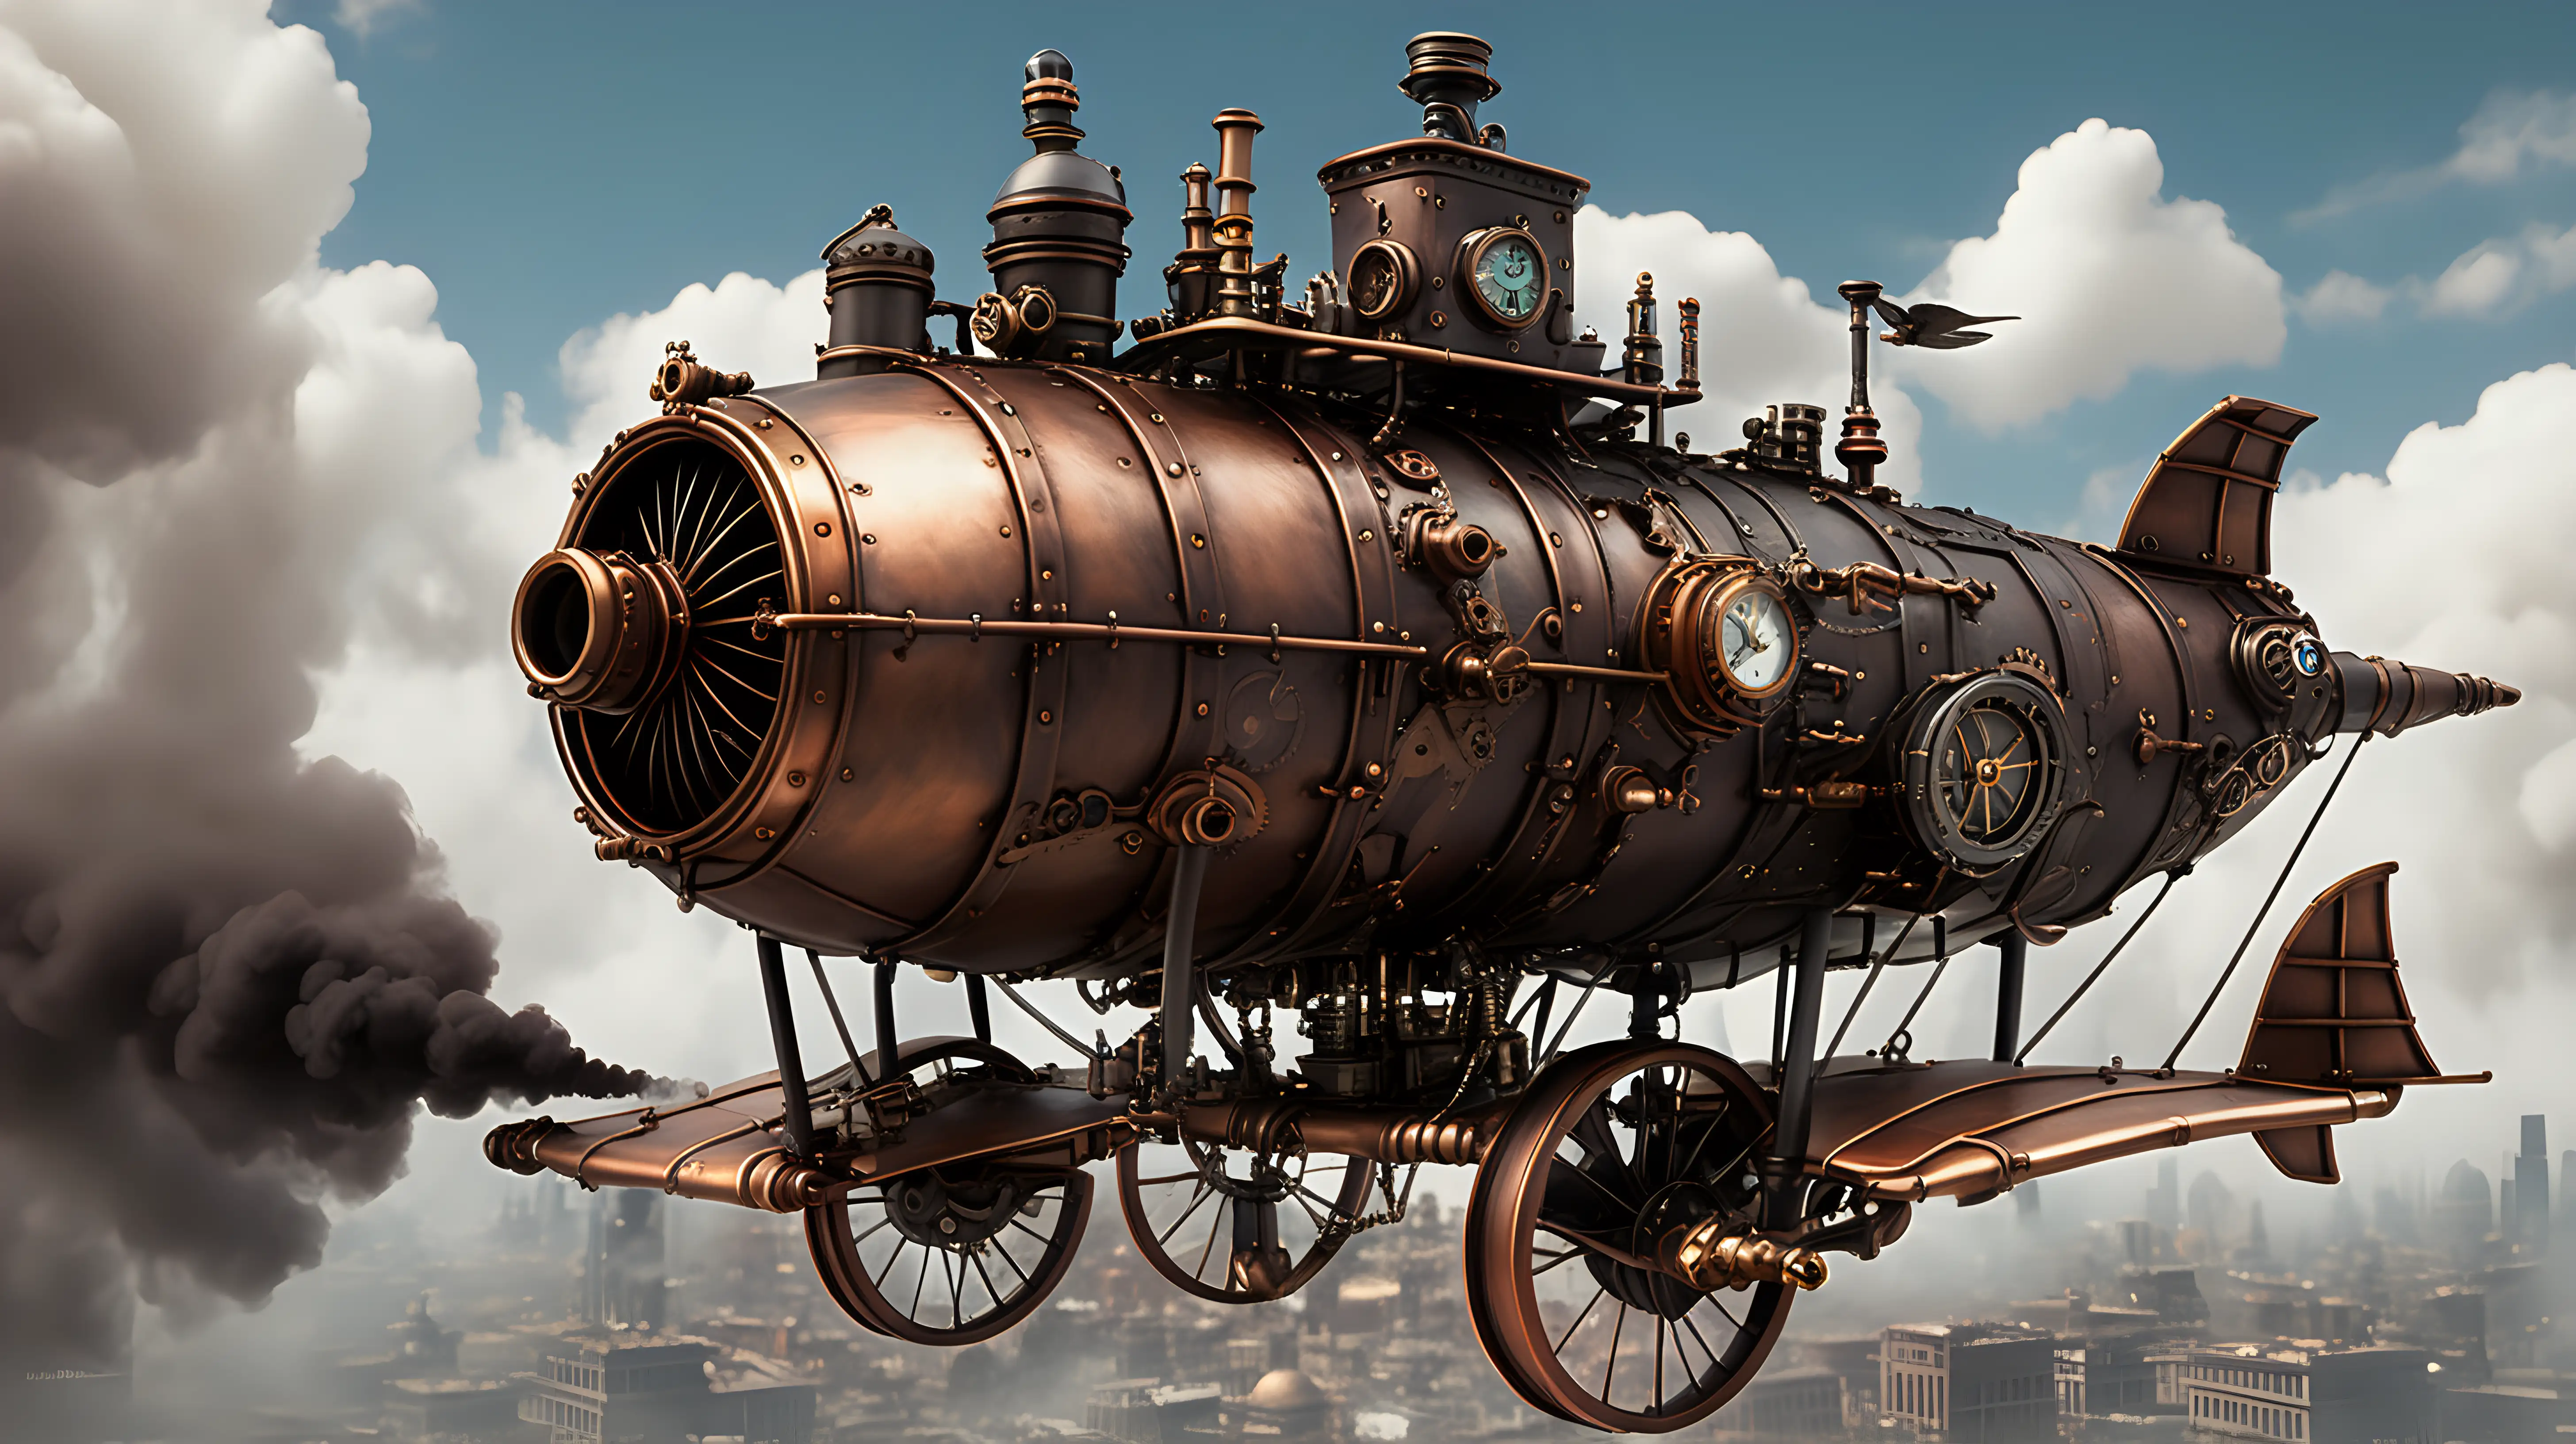 Steampunk Flying Machines in City Sky with Pilot and Steam Exhaust